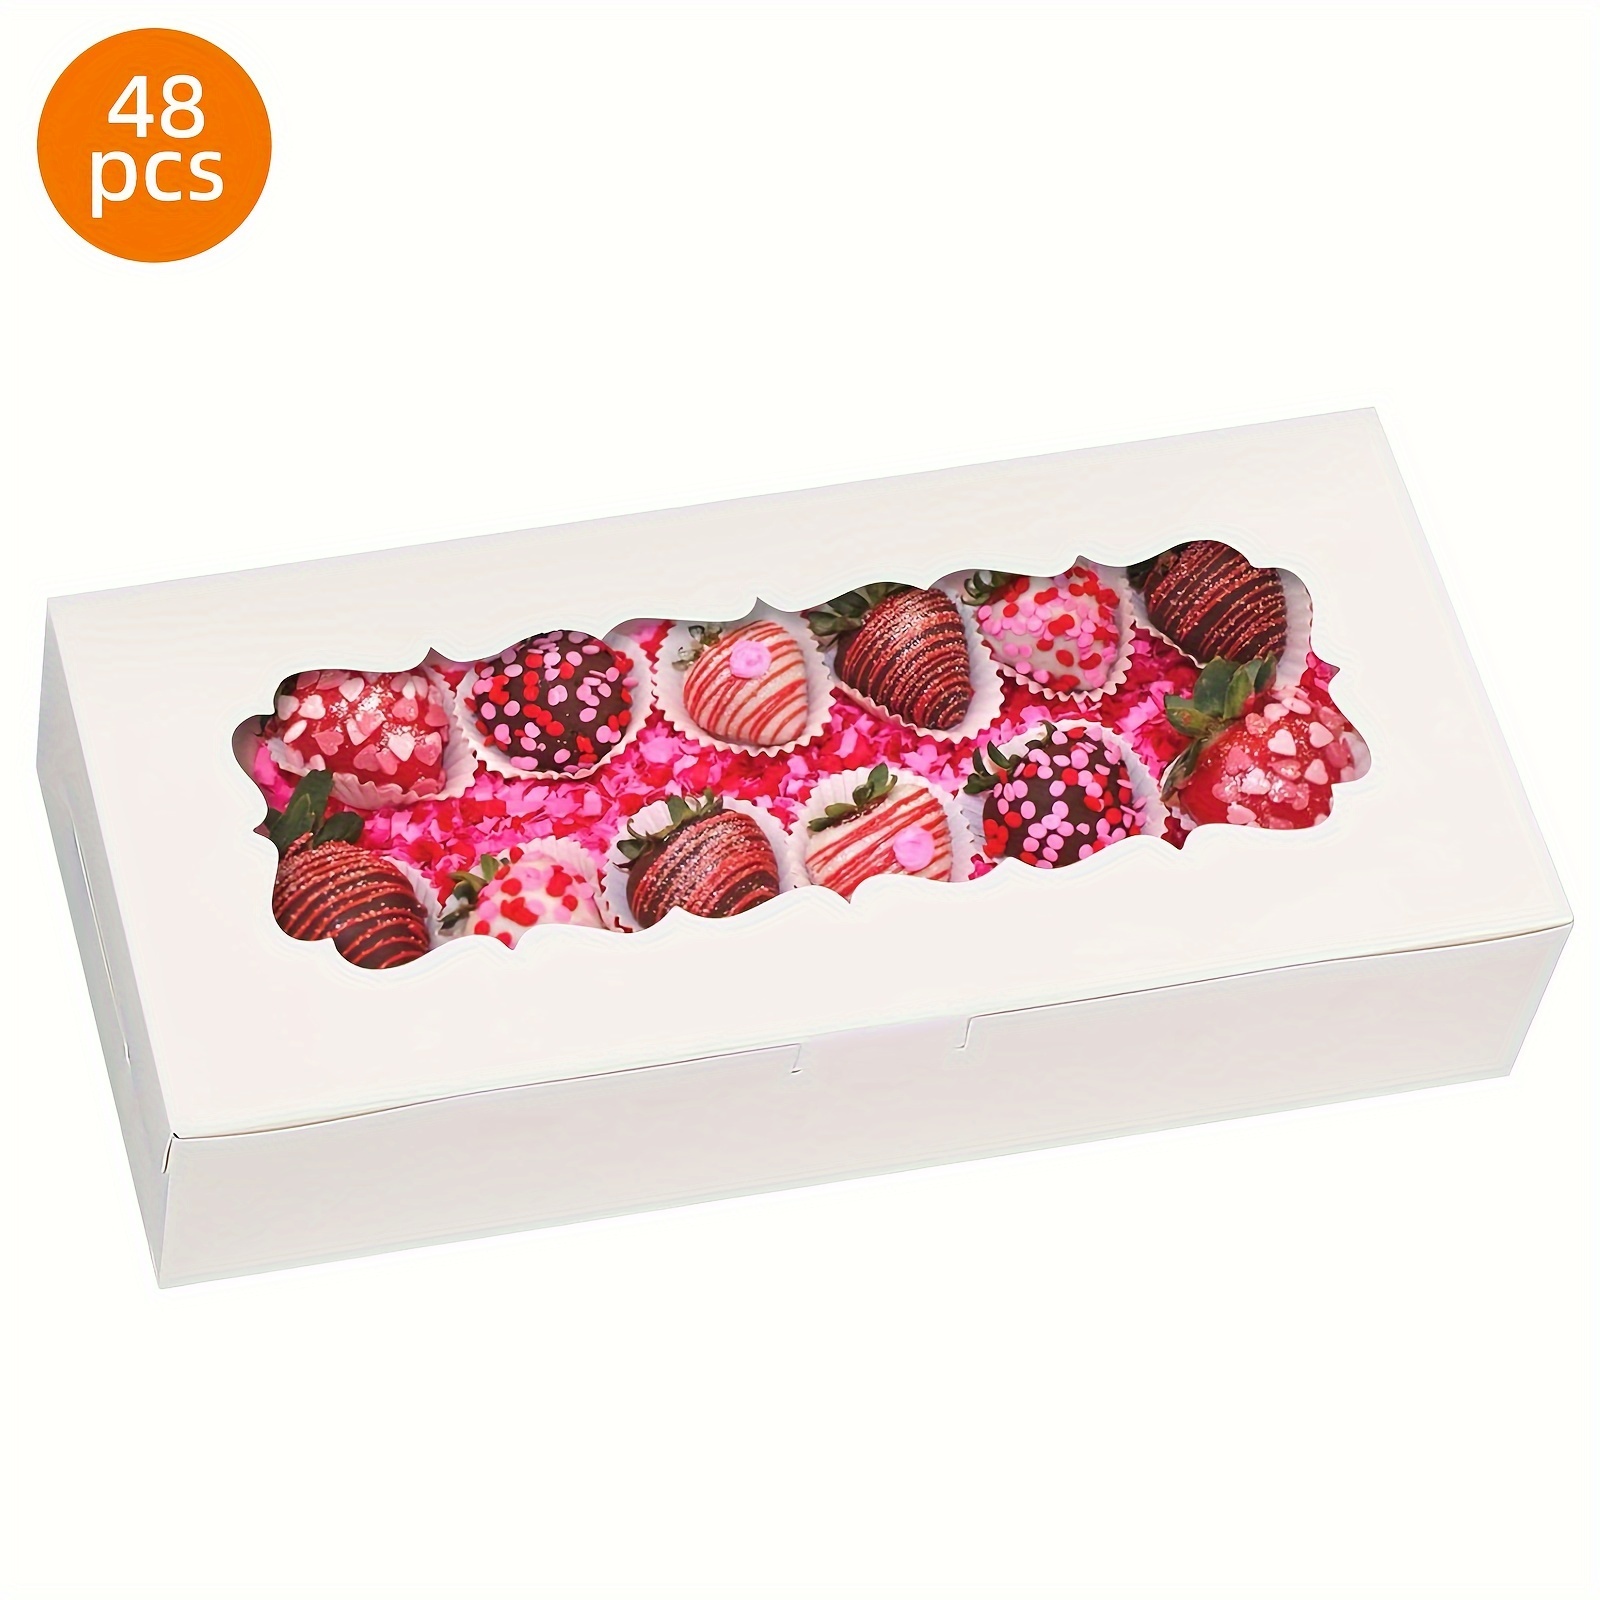 

48pcs Cookie Boxes, 12 X 5.5 X 2.5 Inches Bakery Boxes, Biscuit Boxes, Candy Boxes, Boxes Pastry Boxes Strawberry Boxes For Chocolate Covered Strawberries, Muffins, Donuts